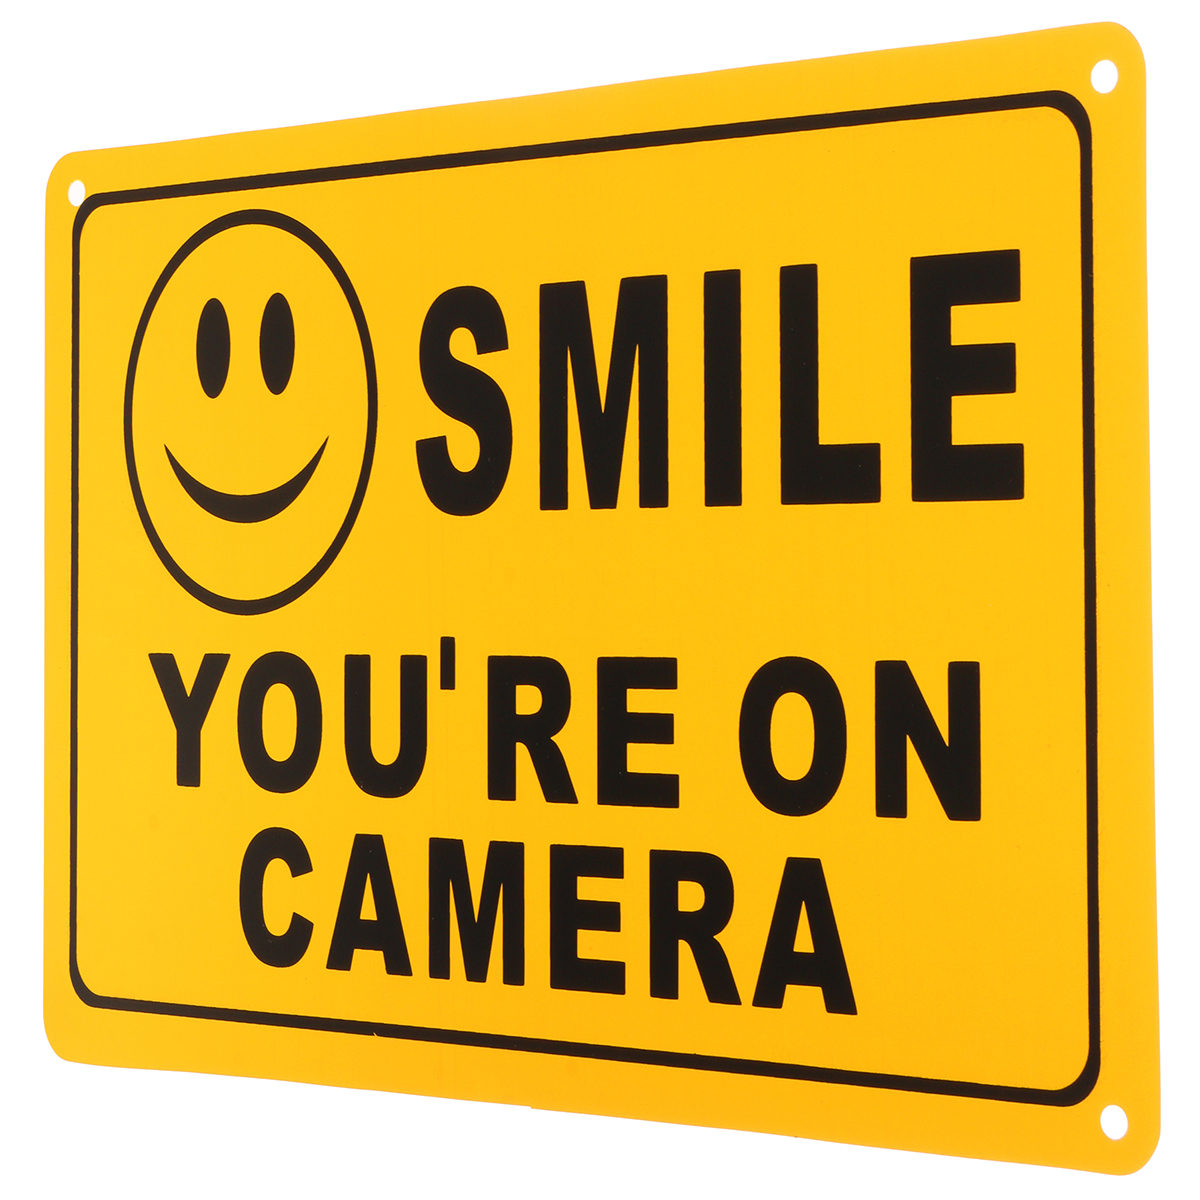 2Pcs-SMILE-YOURE-ON-CAMERA-Warning-Security-Yellow-Sign-CCTV-Video-Surveillance-Camera-Sticker-28x18-1180754-4